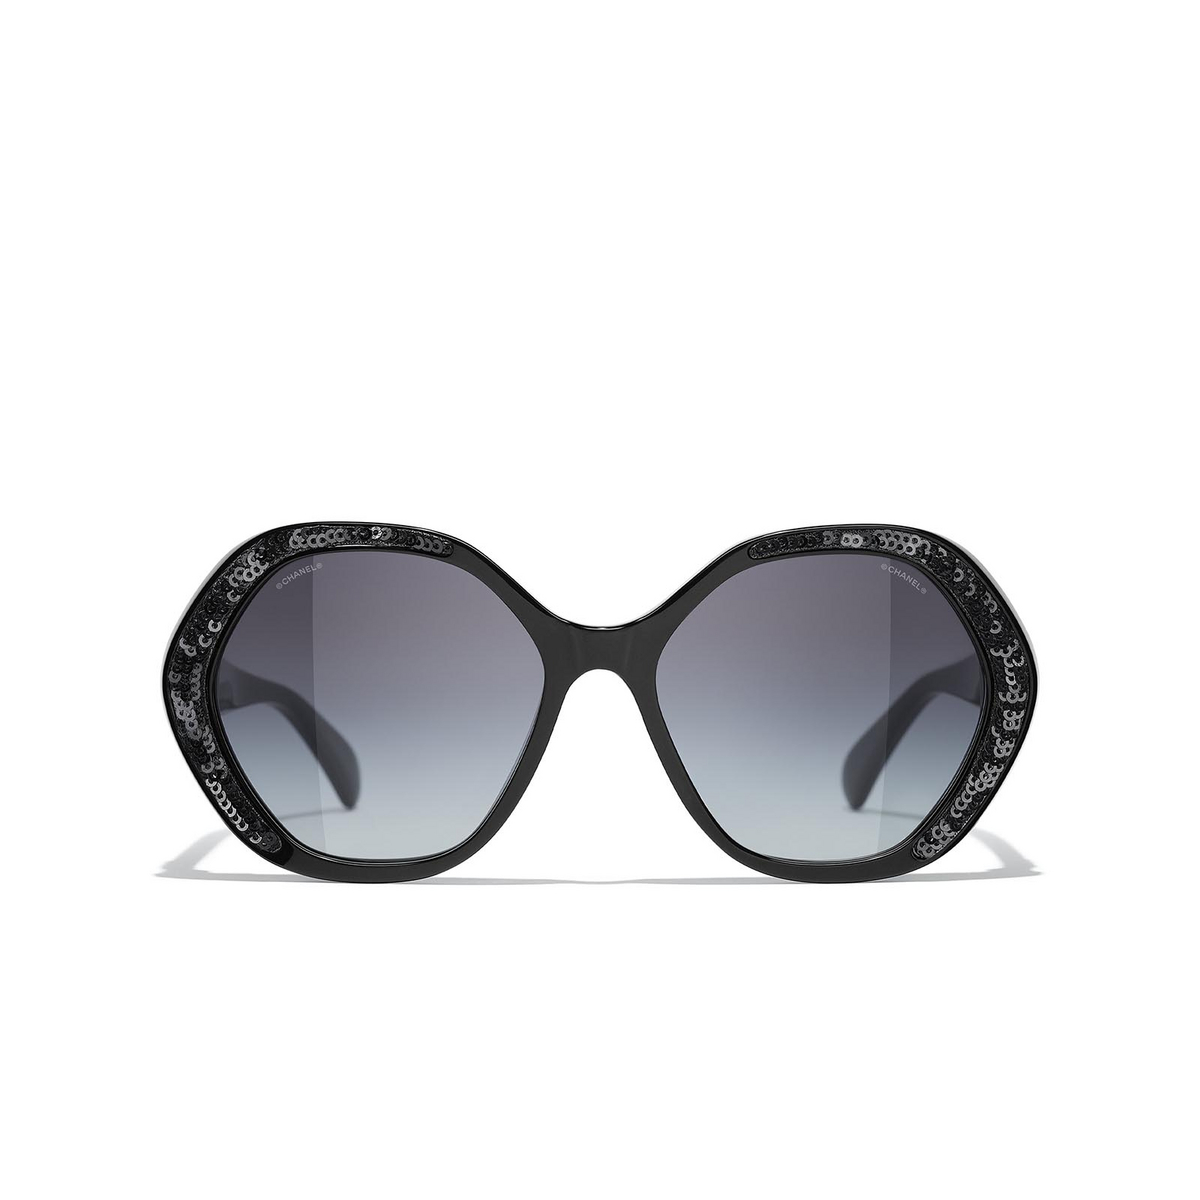 CHANEL round Sunglasses C622S6 Black - front view